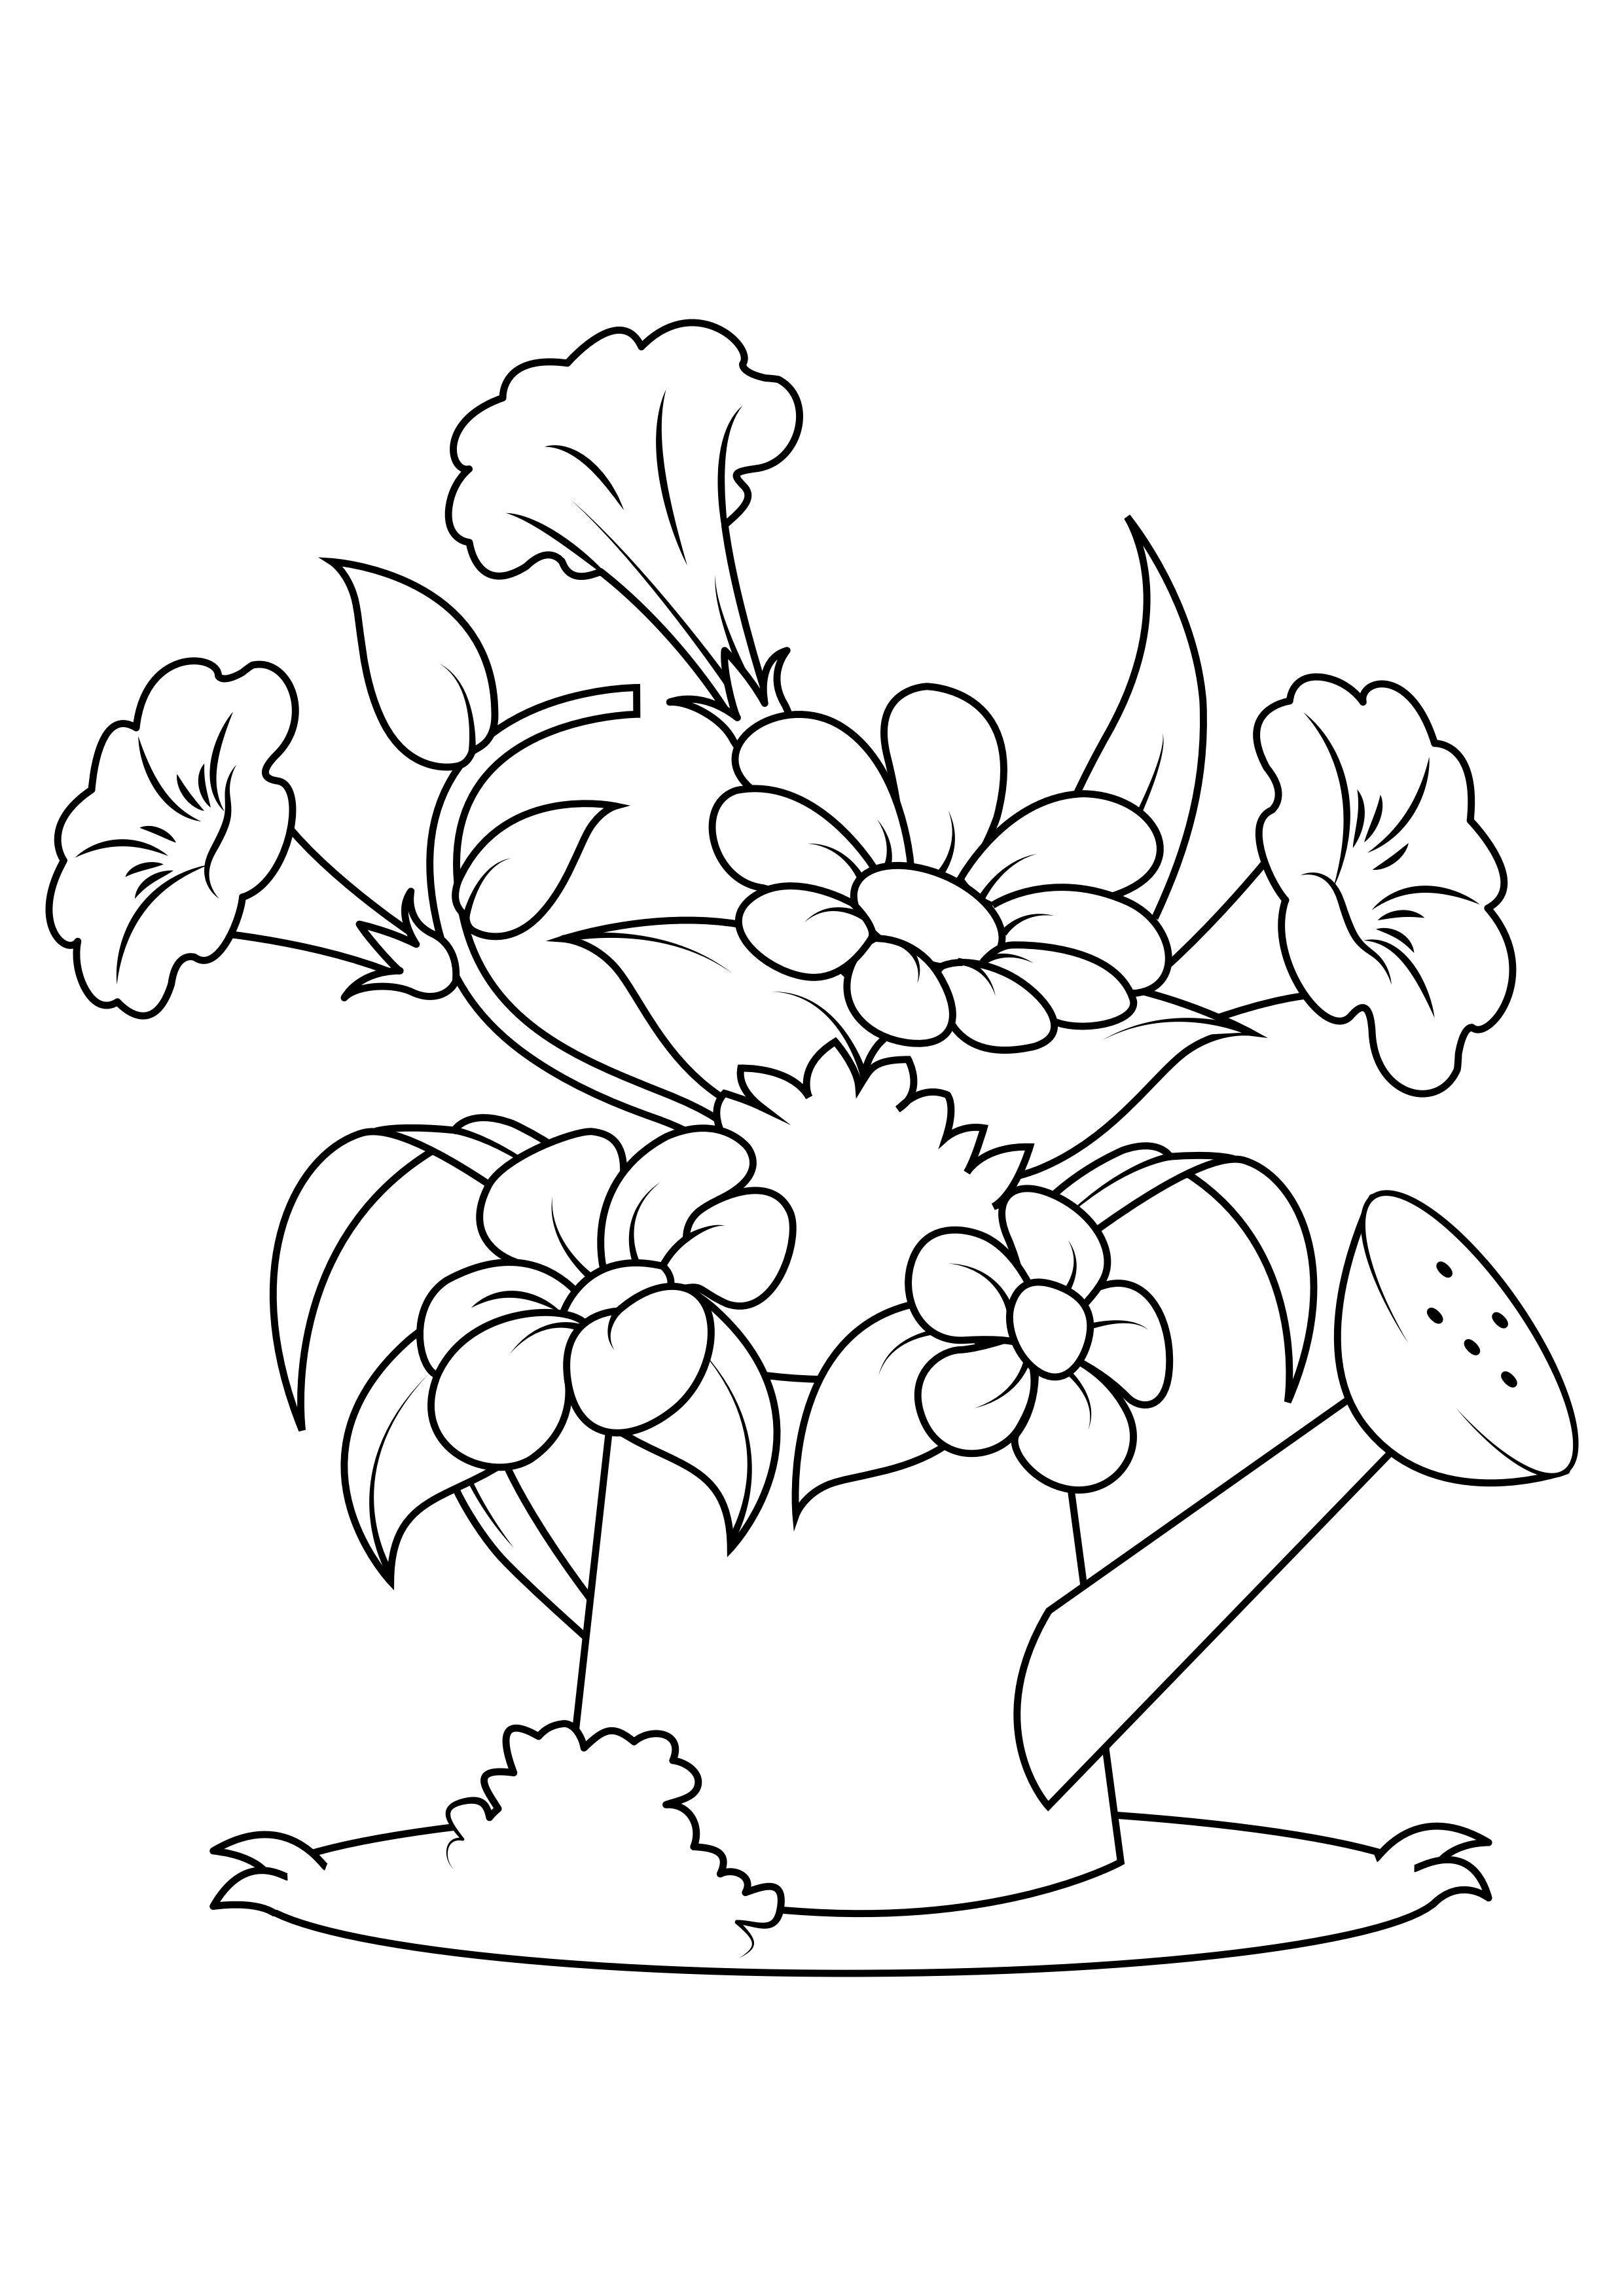 Coloring Page flowers in watering can - free printable coloring pages - Img  31846